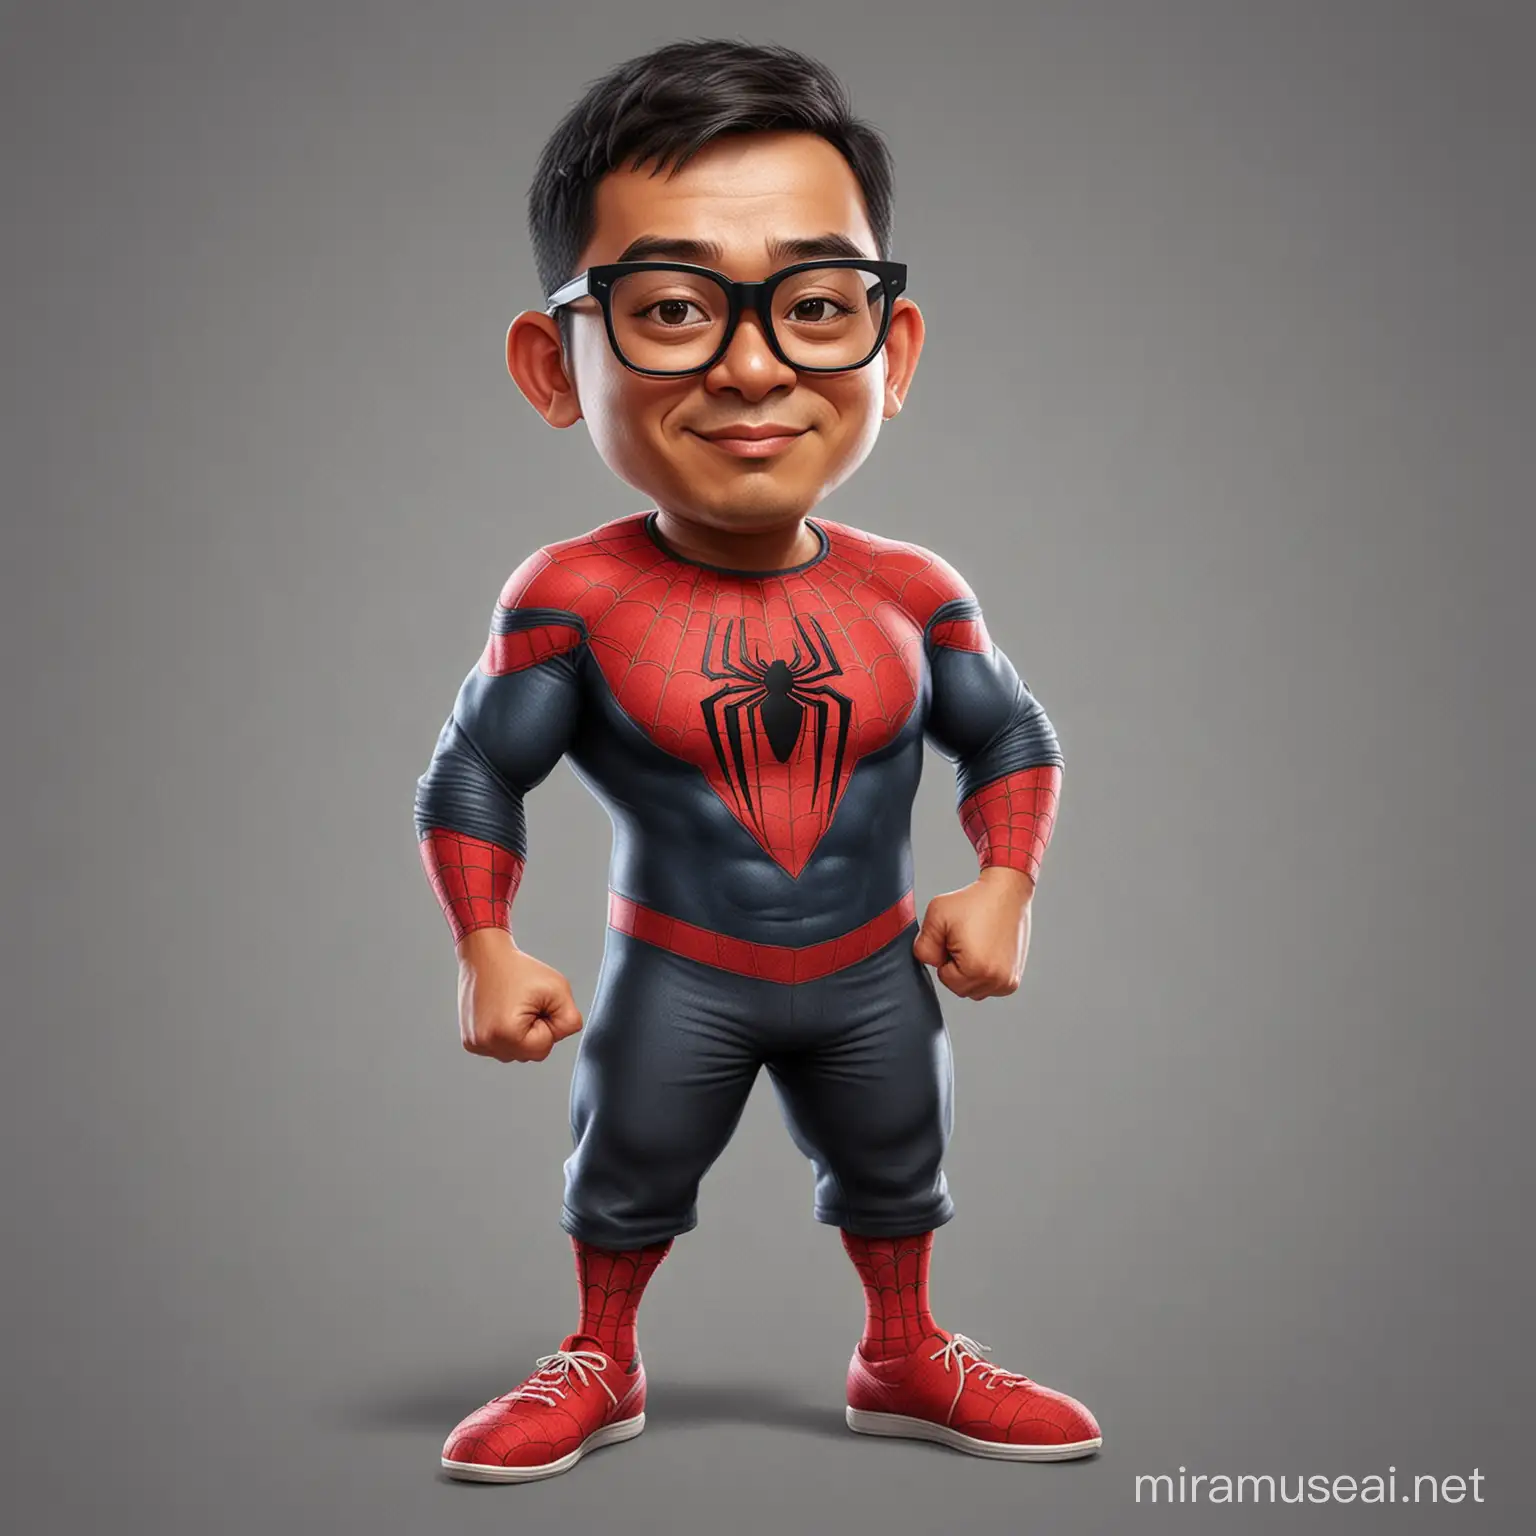 Caricature potrait full body, An Indonesian man, wearing glasses, neat short hair, wearing a Spiderman outfit, realistic.